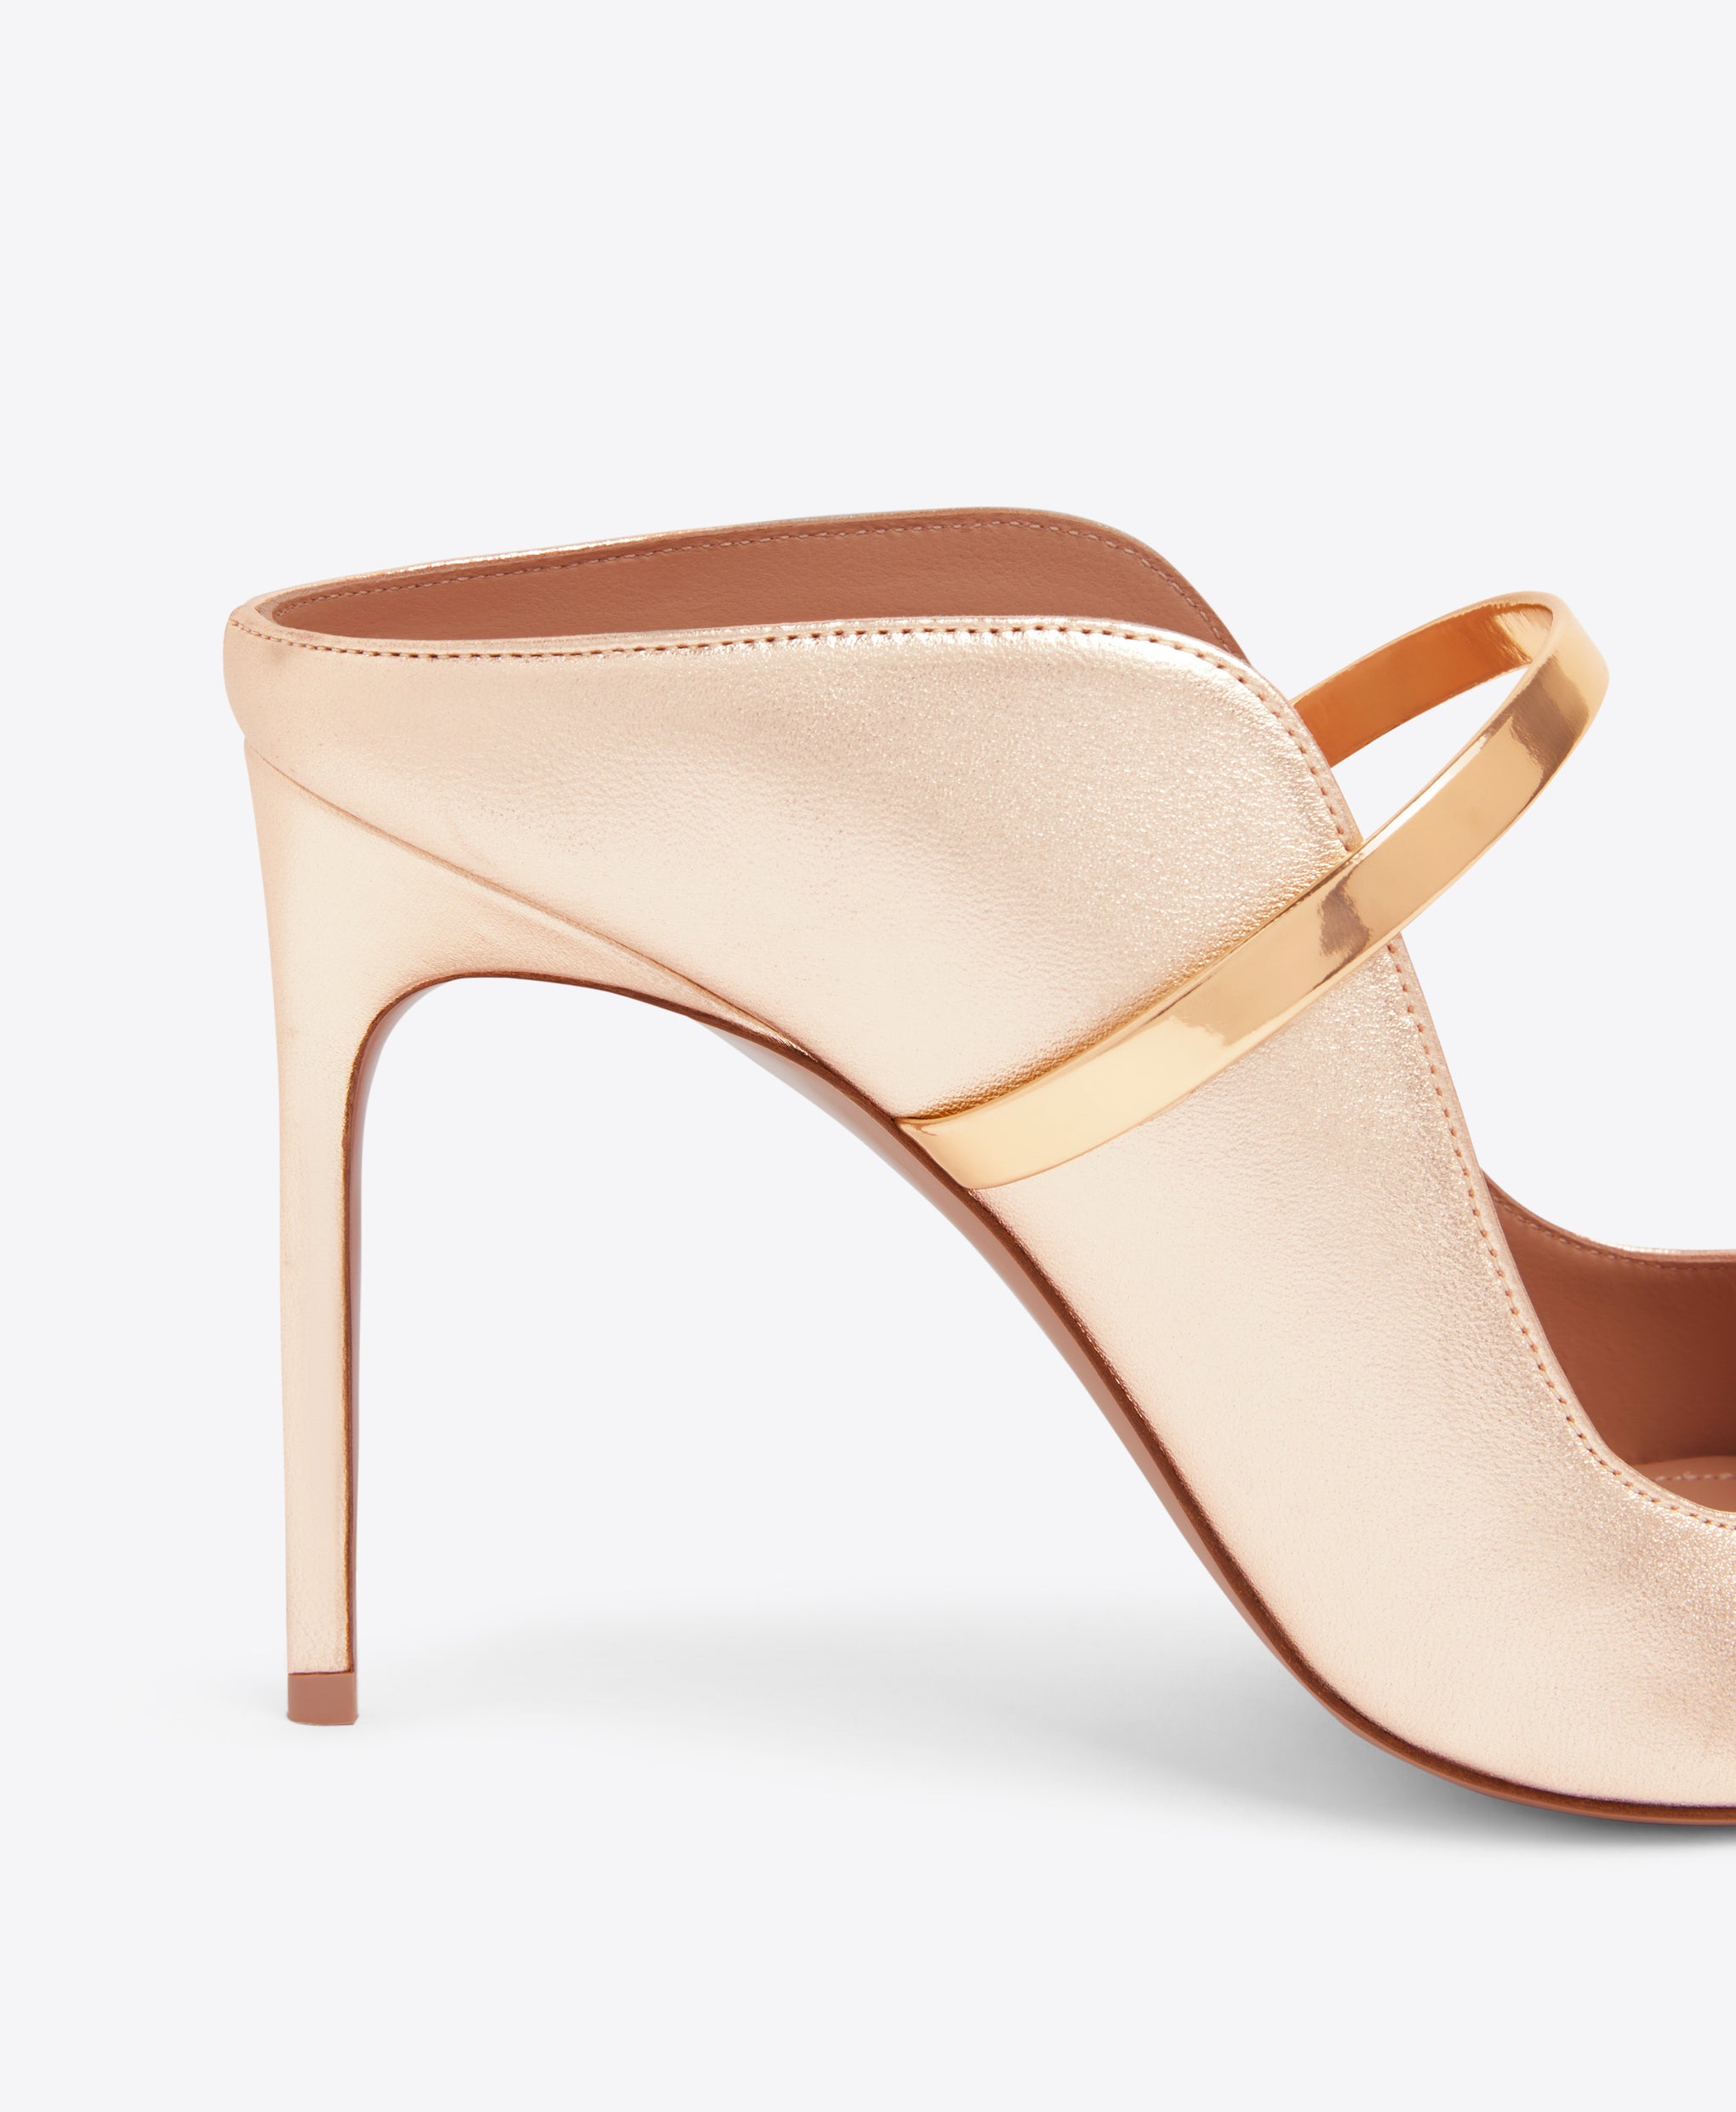 Noah 90 Rose Gold Leather Heeled Sandals Malone Souliers